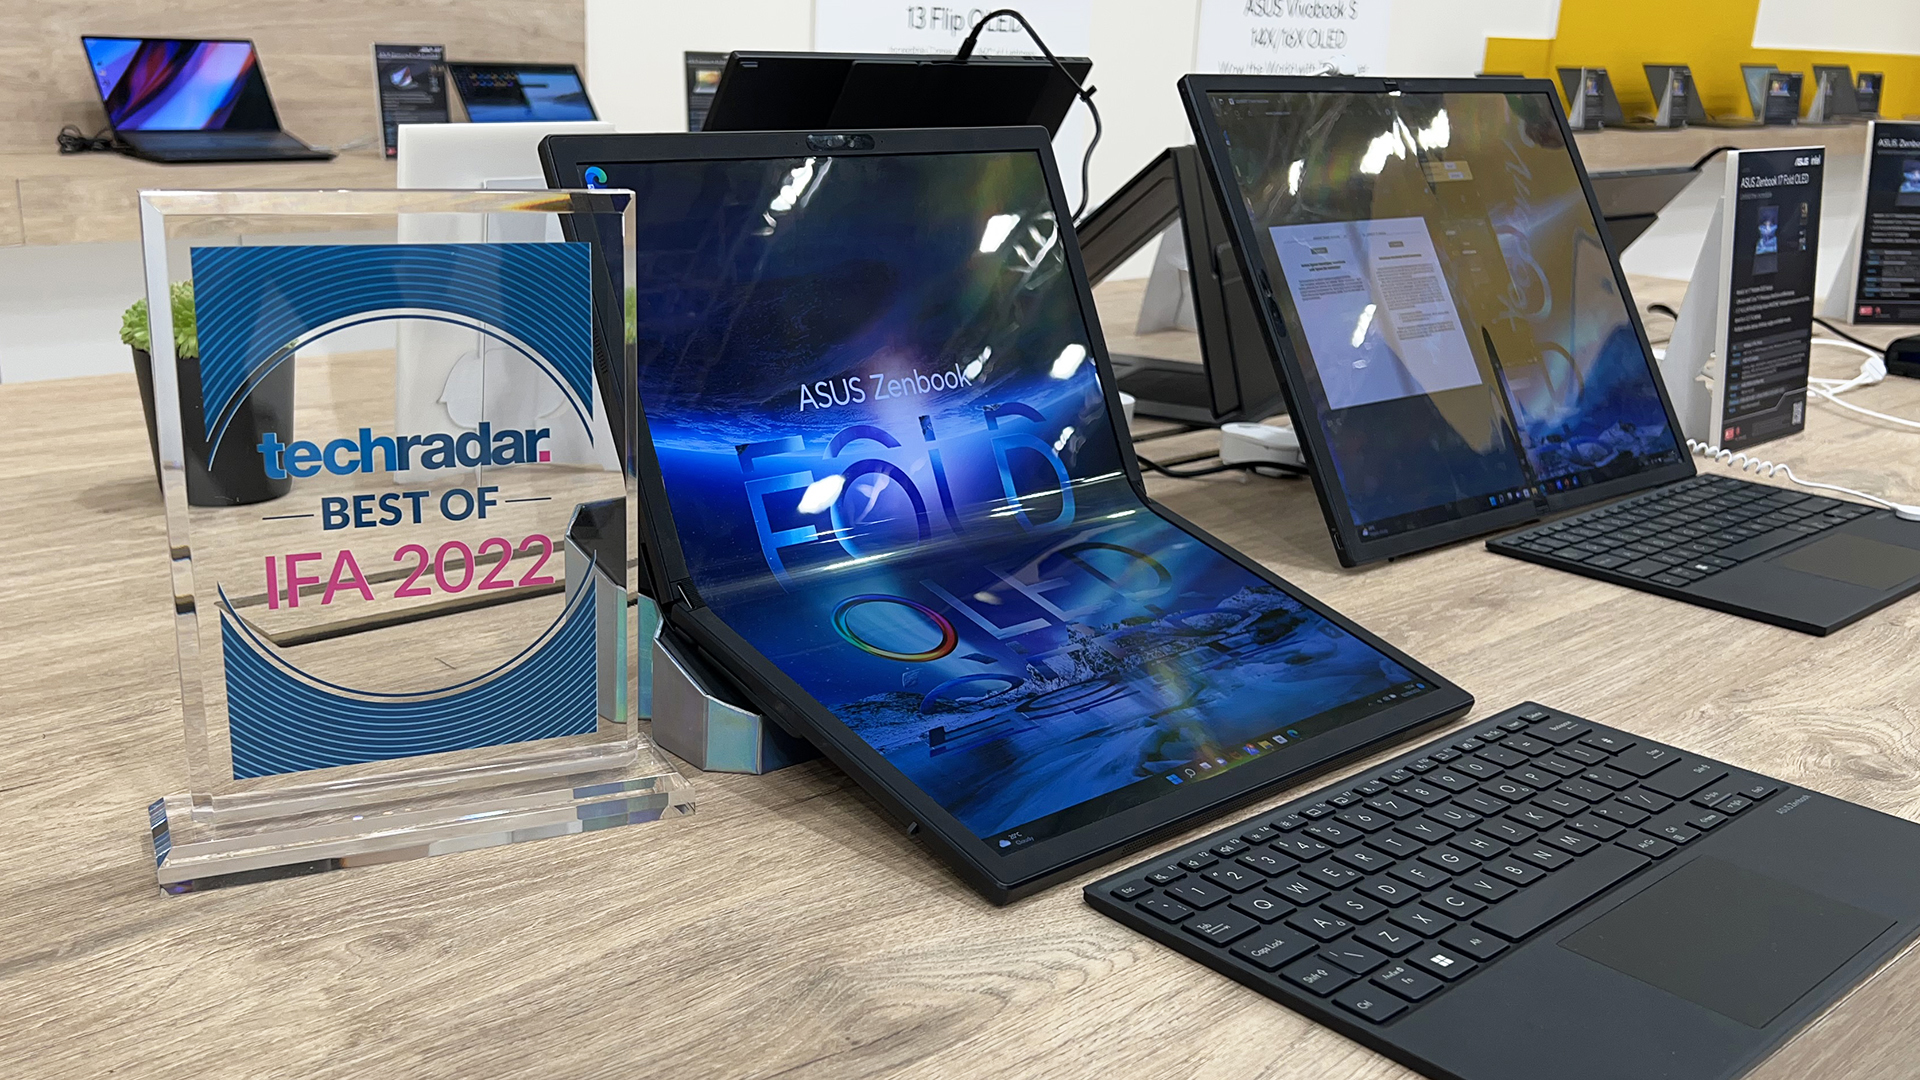 IFA 2022 award with Asus Zenbook 17 Fold OLED laptop and keyboard.